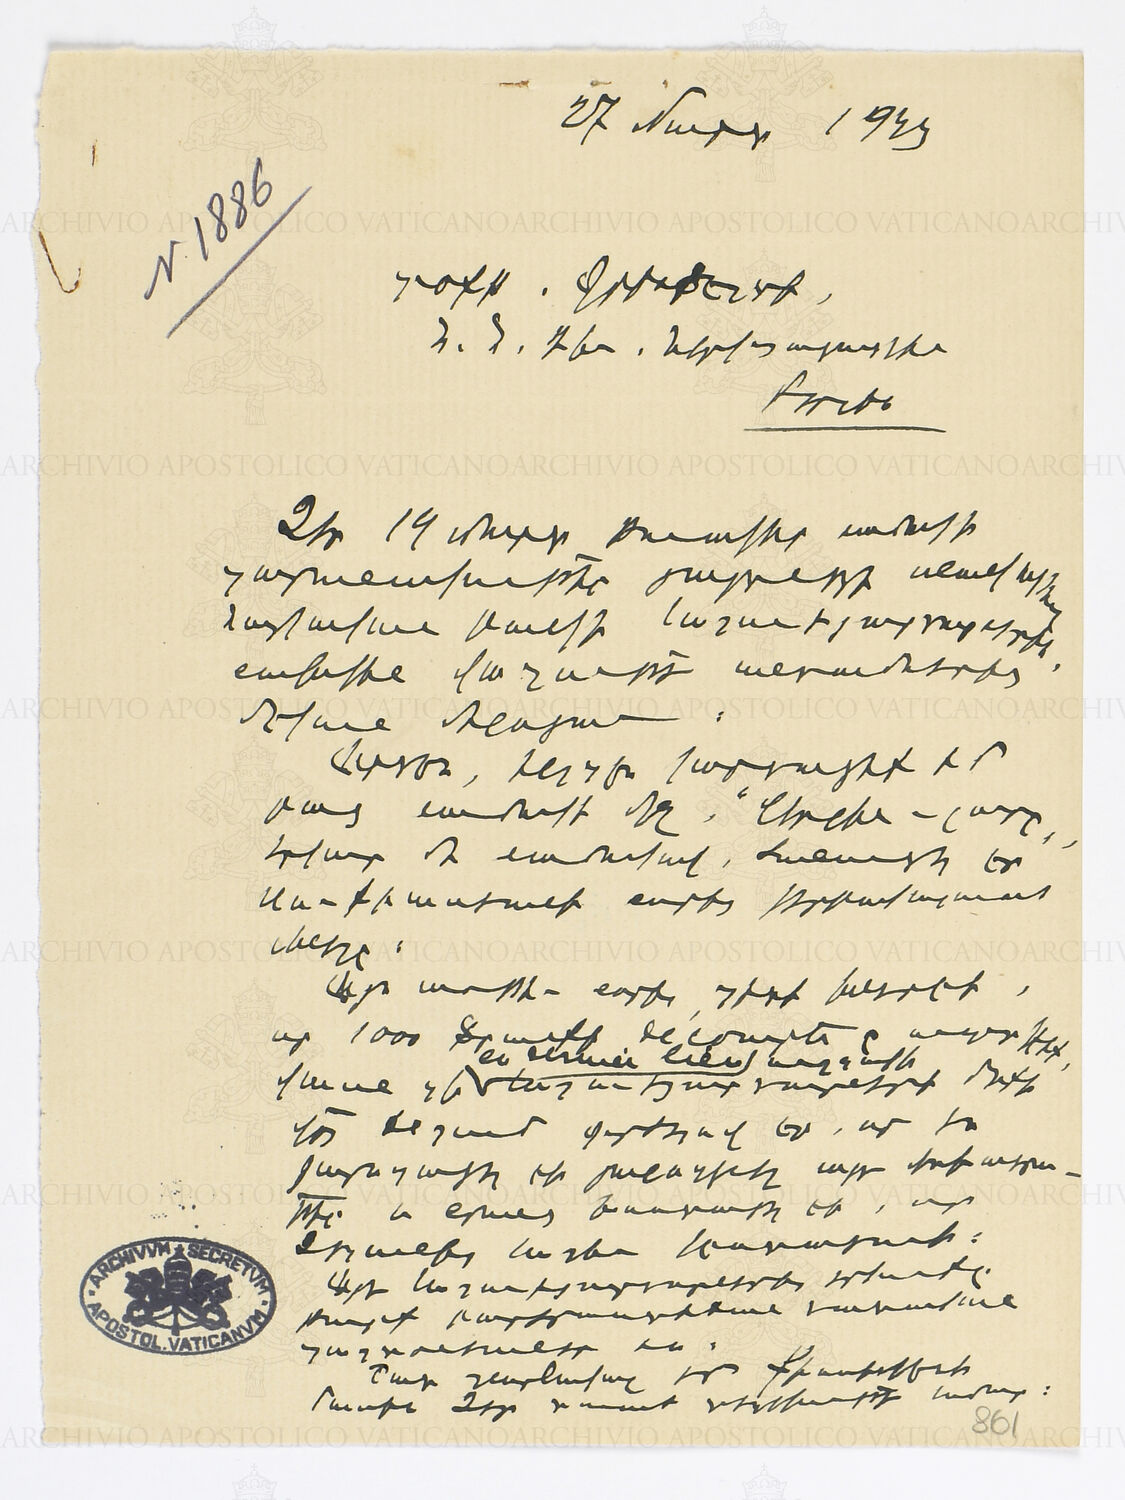 The last note with archive number, 1923. Archivio Apostolico Vaticano